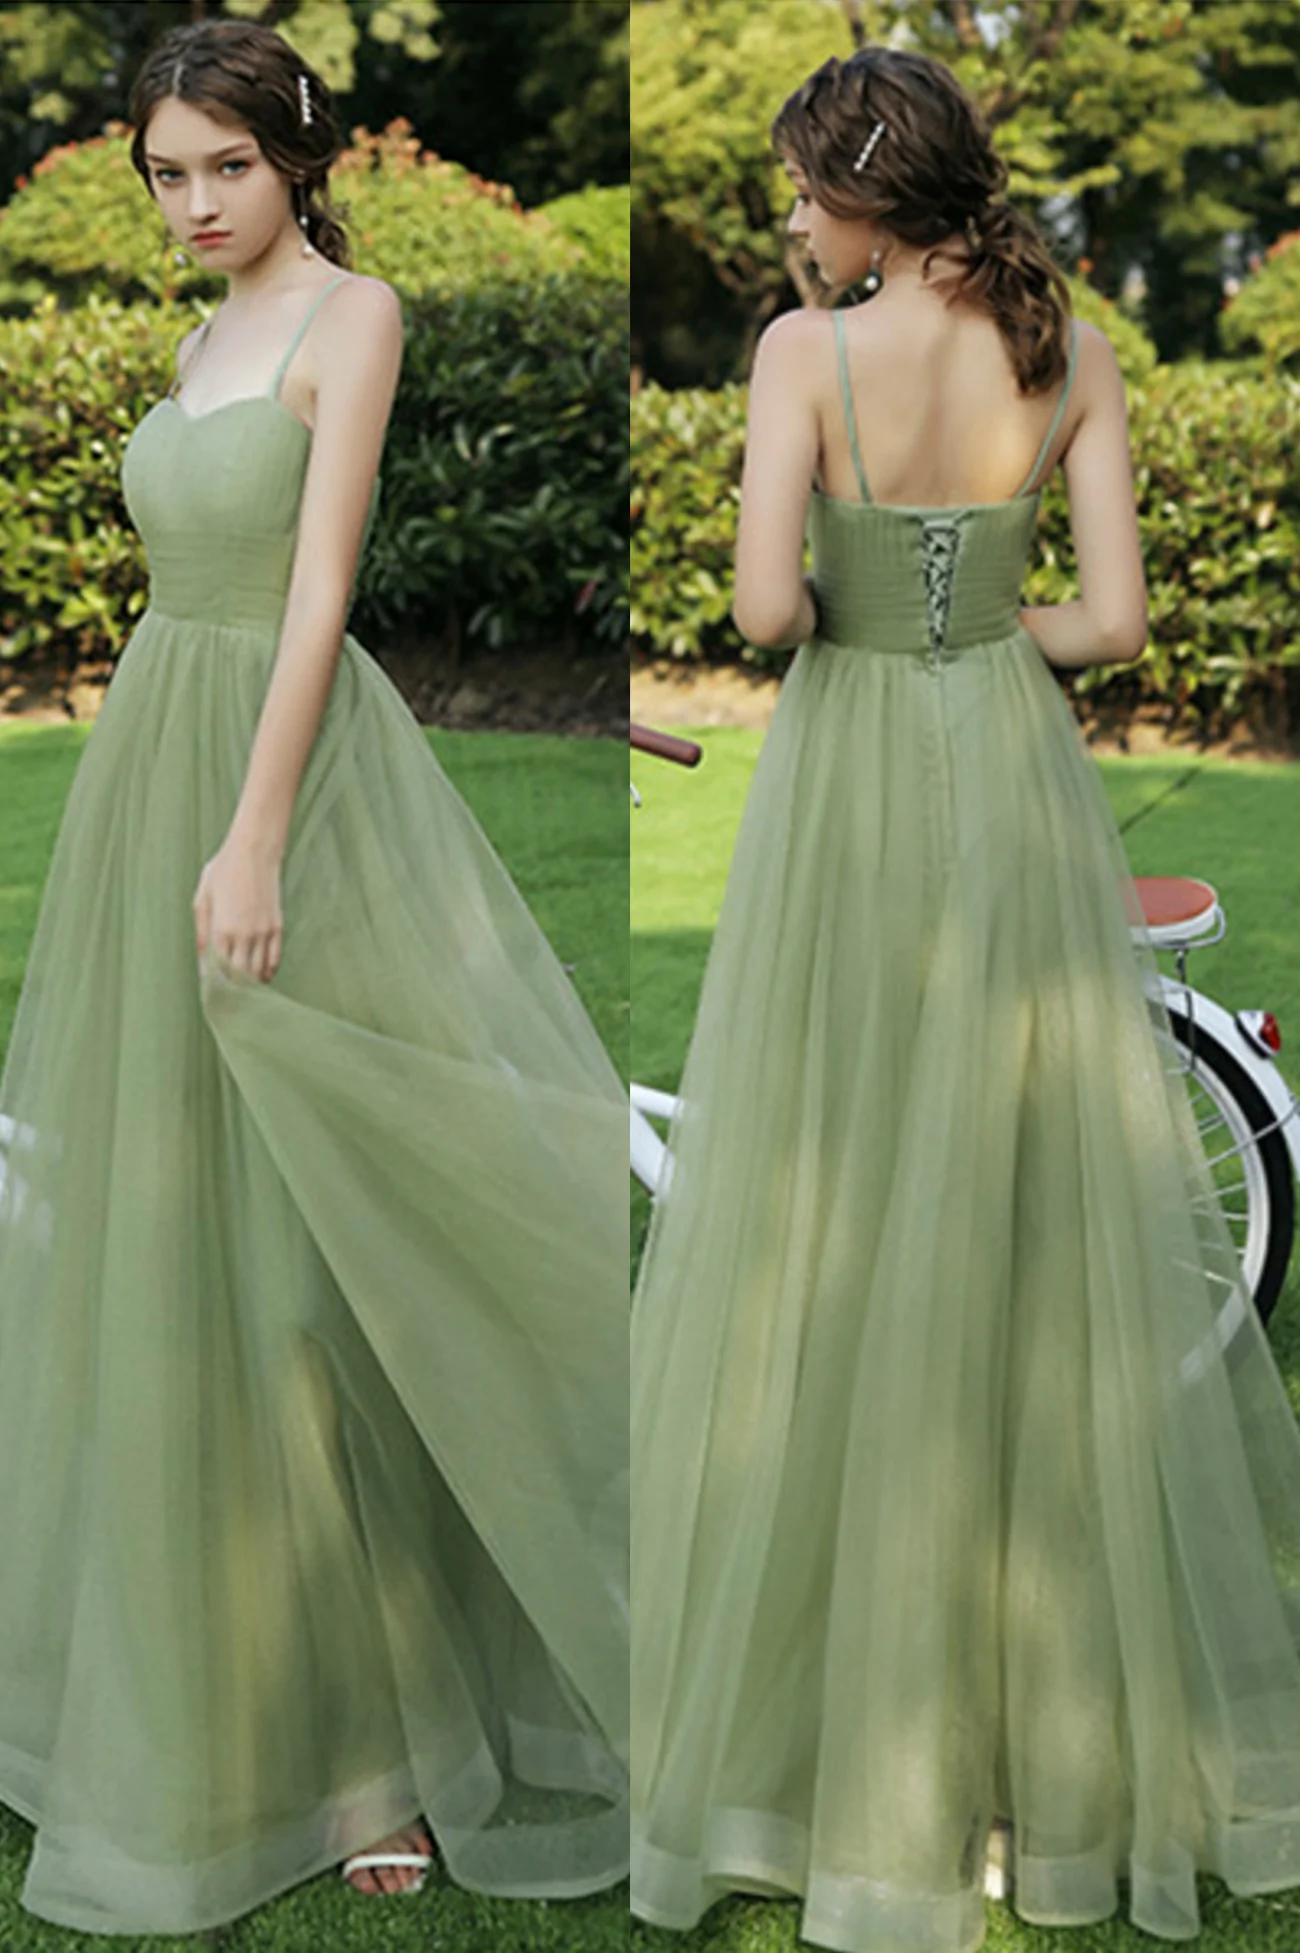 Green Tulle Long Prom Dresses, A-Line Evening Dresses nv553